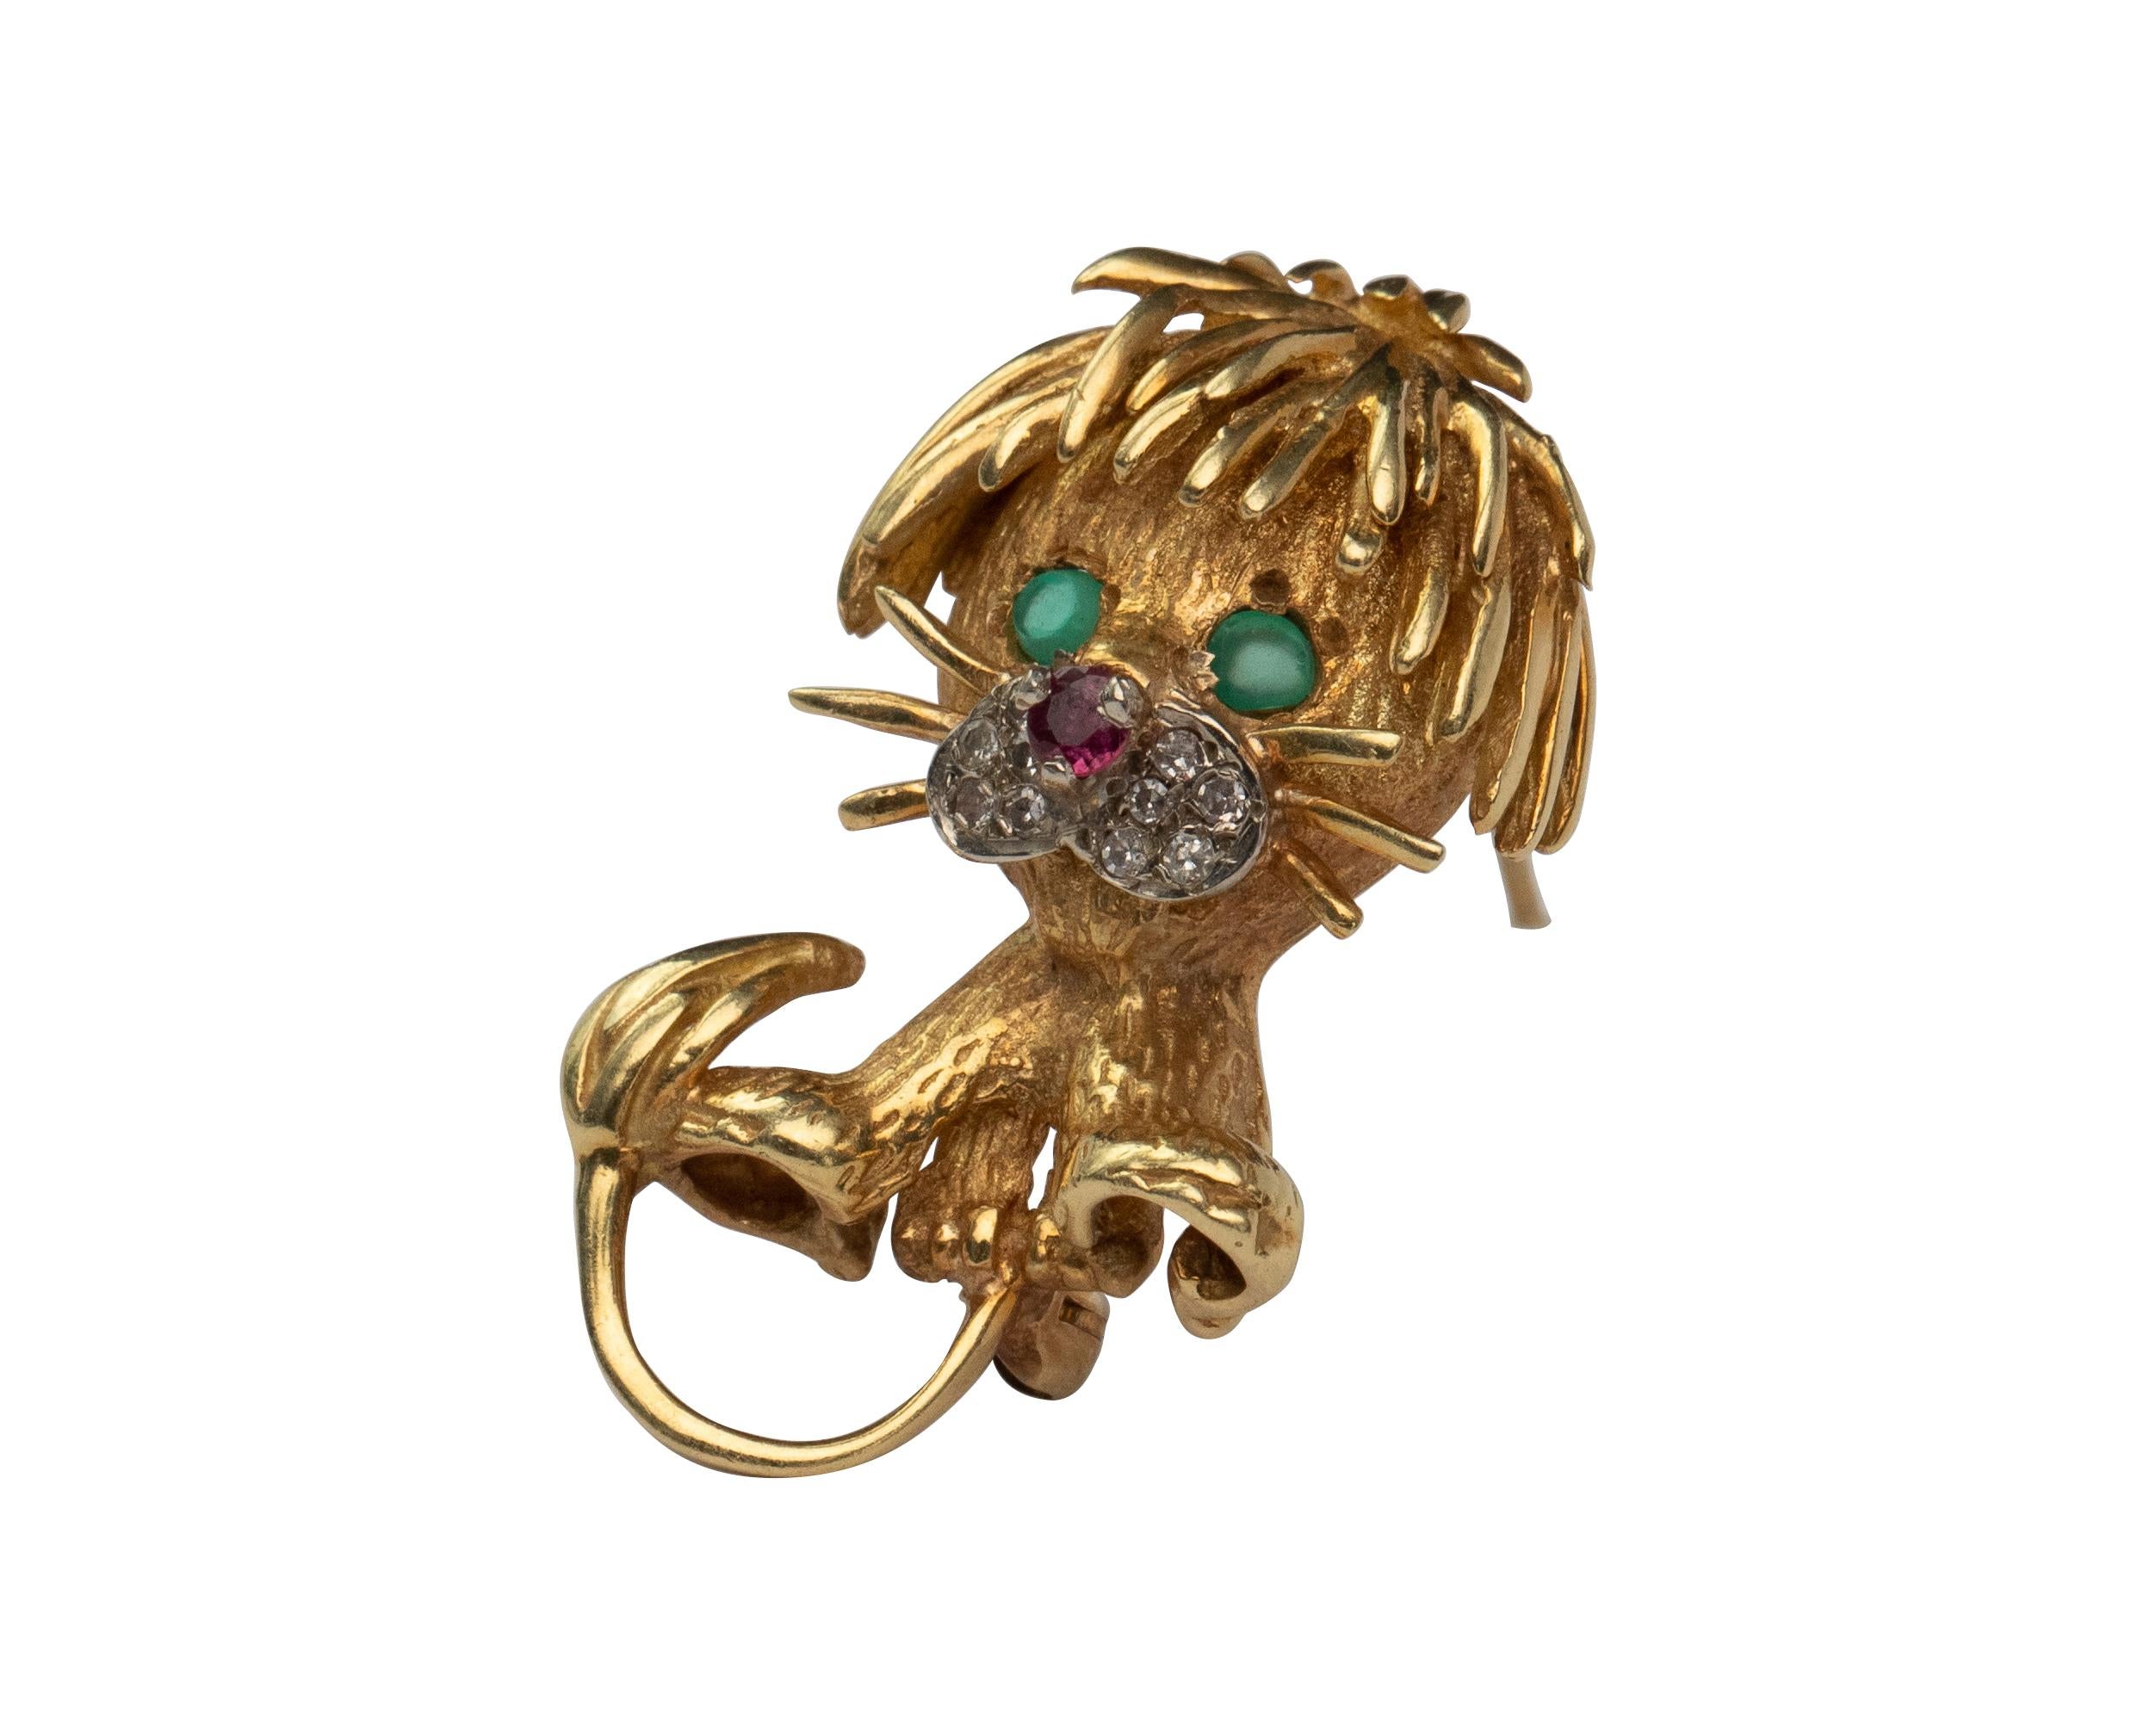 This characteristic lion brooch from 1960s is bright and lustrous with emeralds, rubies, and diamonds on the face. Lions represent courage, dignity, and wisdom in vintage pieces. This lion cub is a playful representation of a lion’s upcoming power